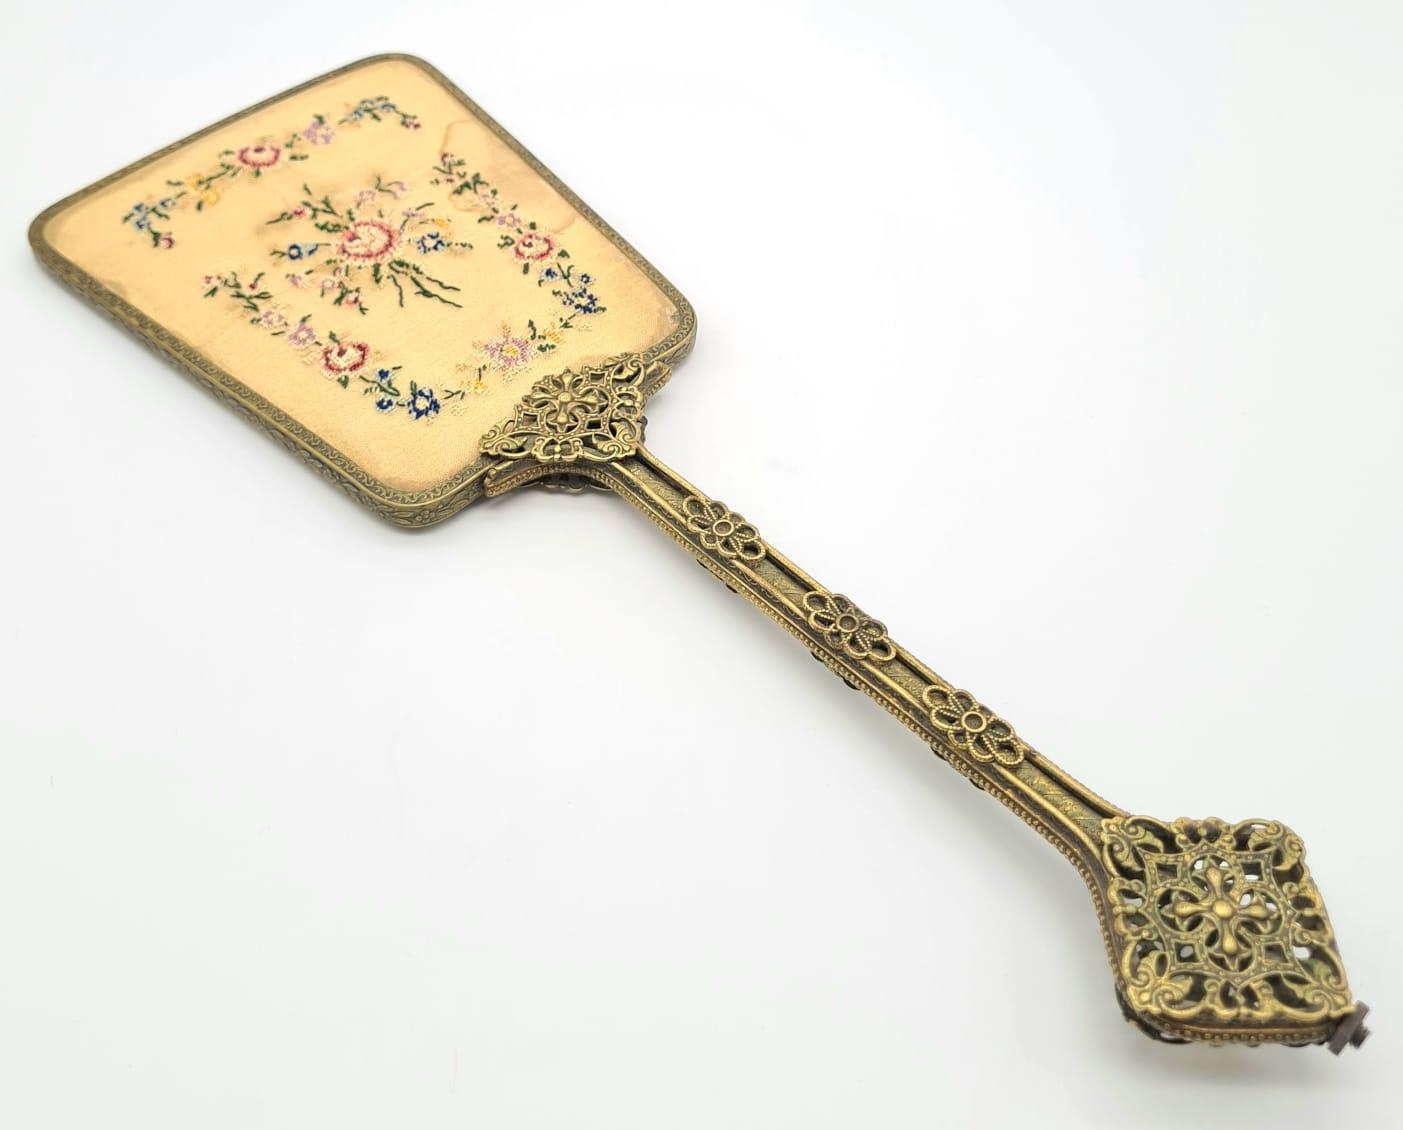 A Beautiful Vintage (1930s) Hand Mirror. Petit point rose decoration on reverse of mirror.